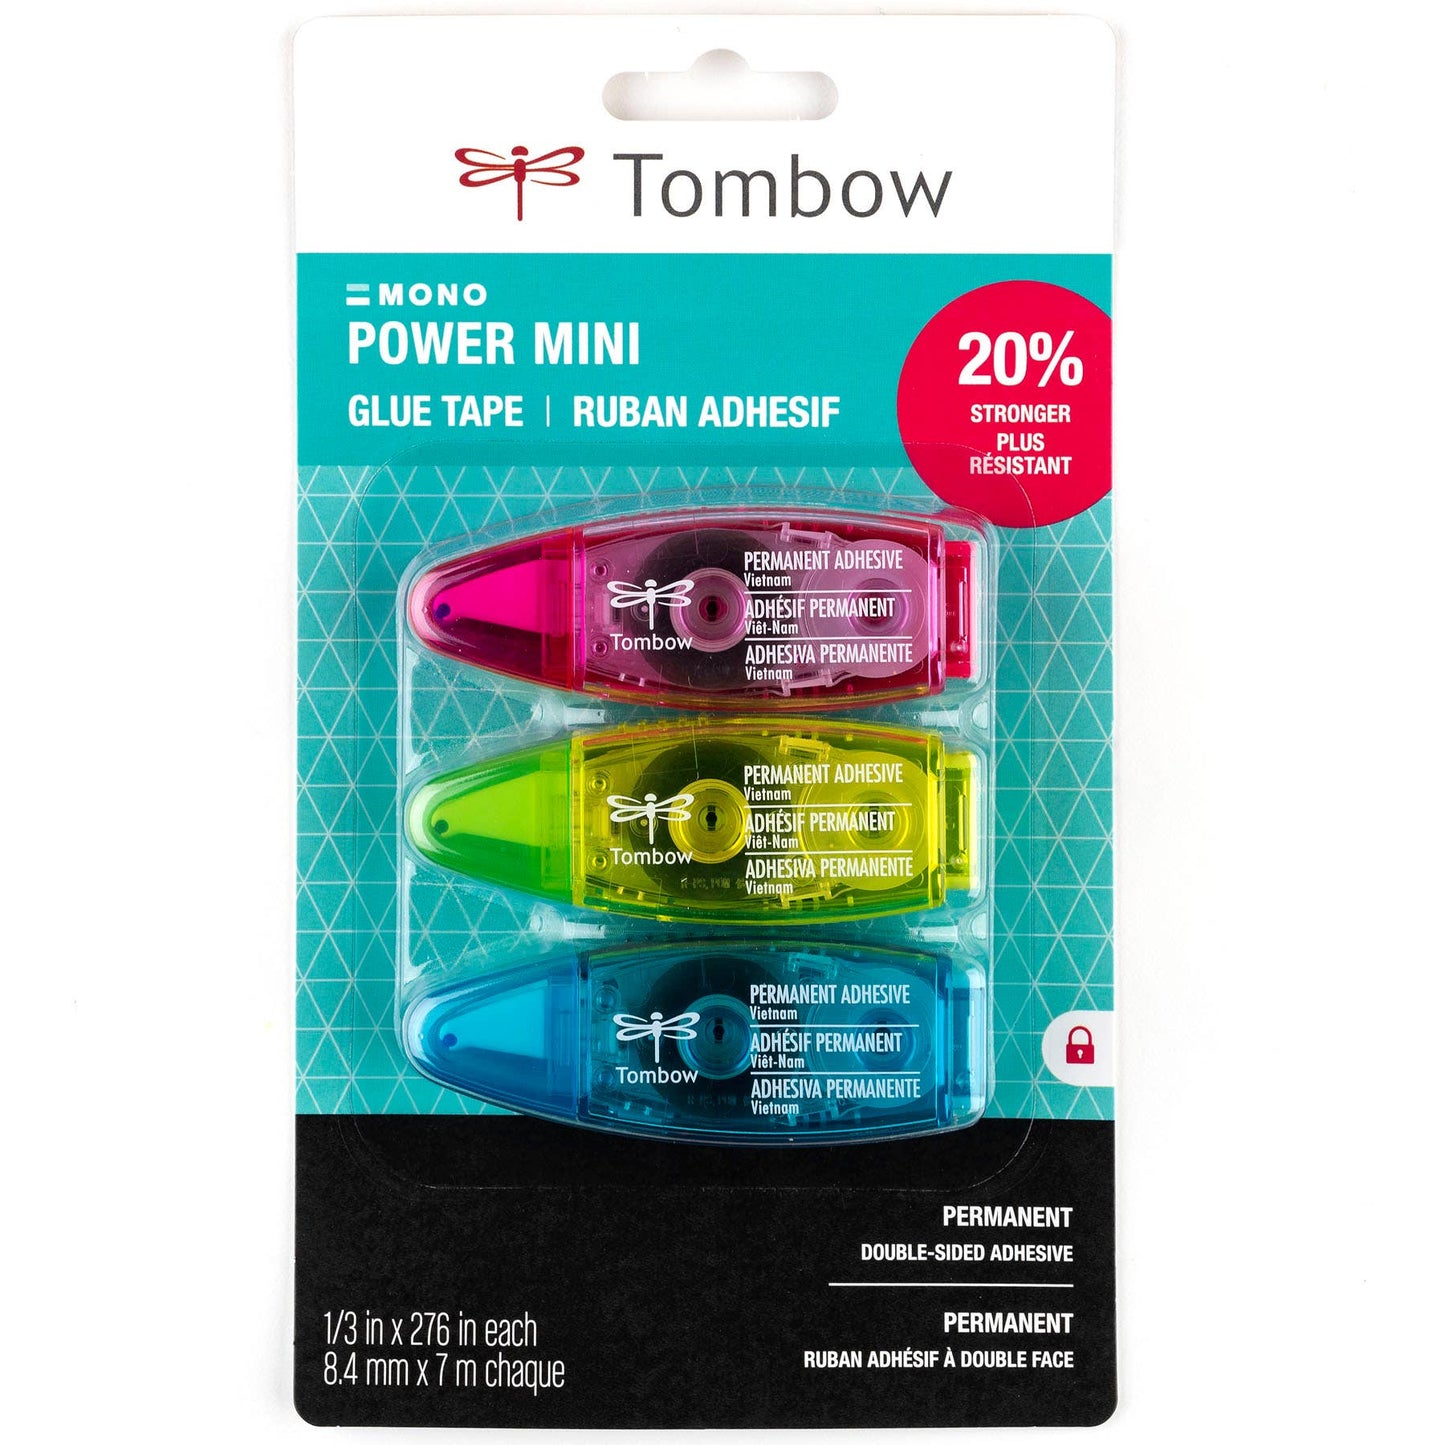 Tombow - Power Mini Glue Tapes - 3-Pack